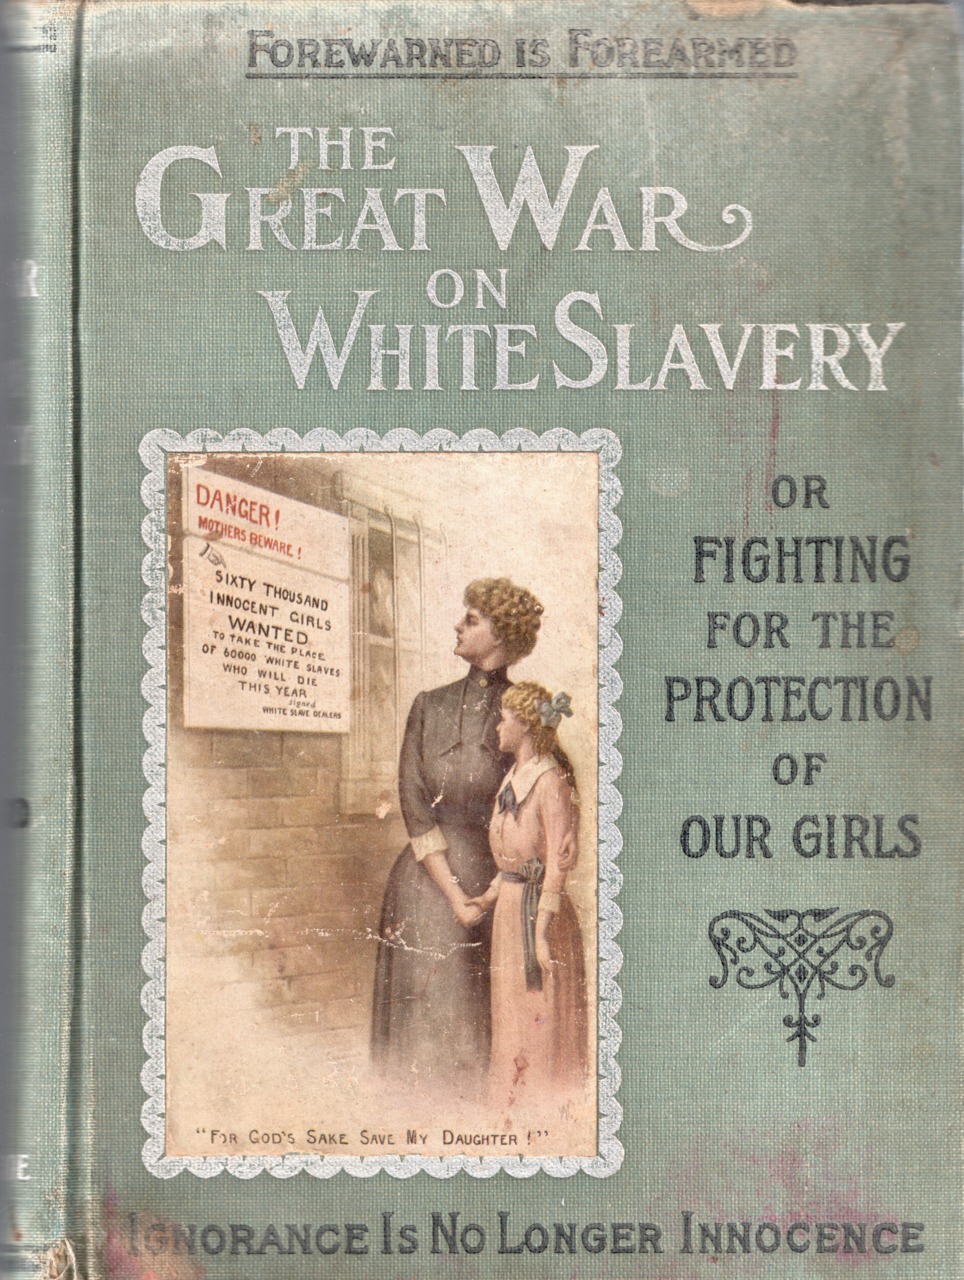 Photo of the book, "The Great War on White Slavery," by Clifford Roe